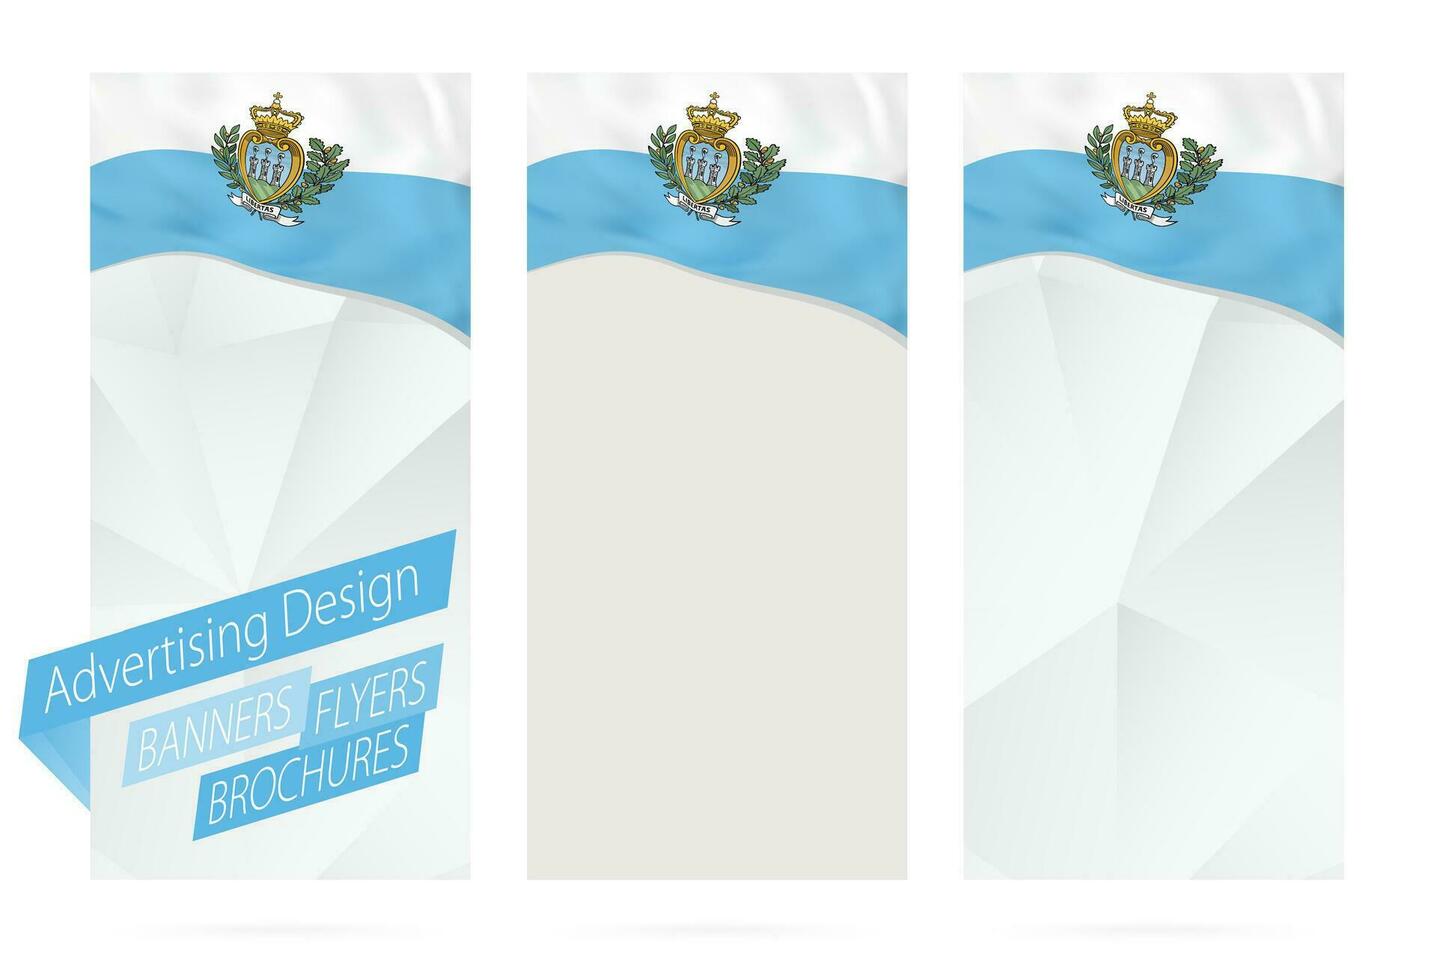 Design of banners, flyers, brochures with flag of San Marino. vector